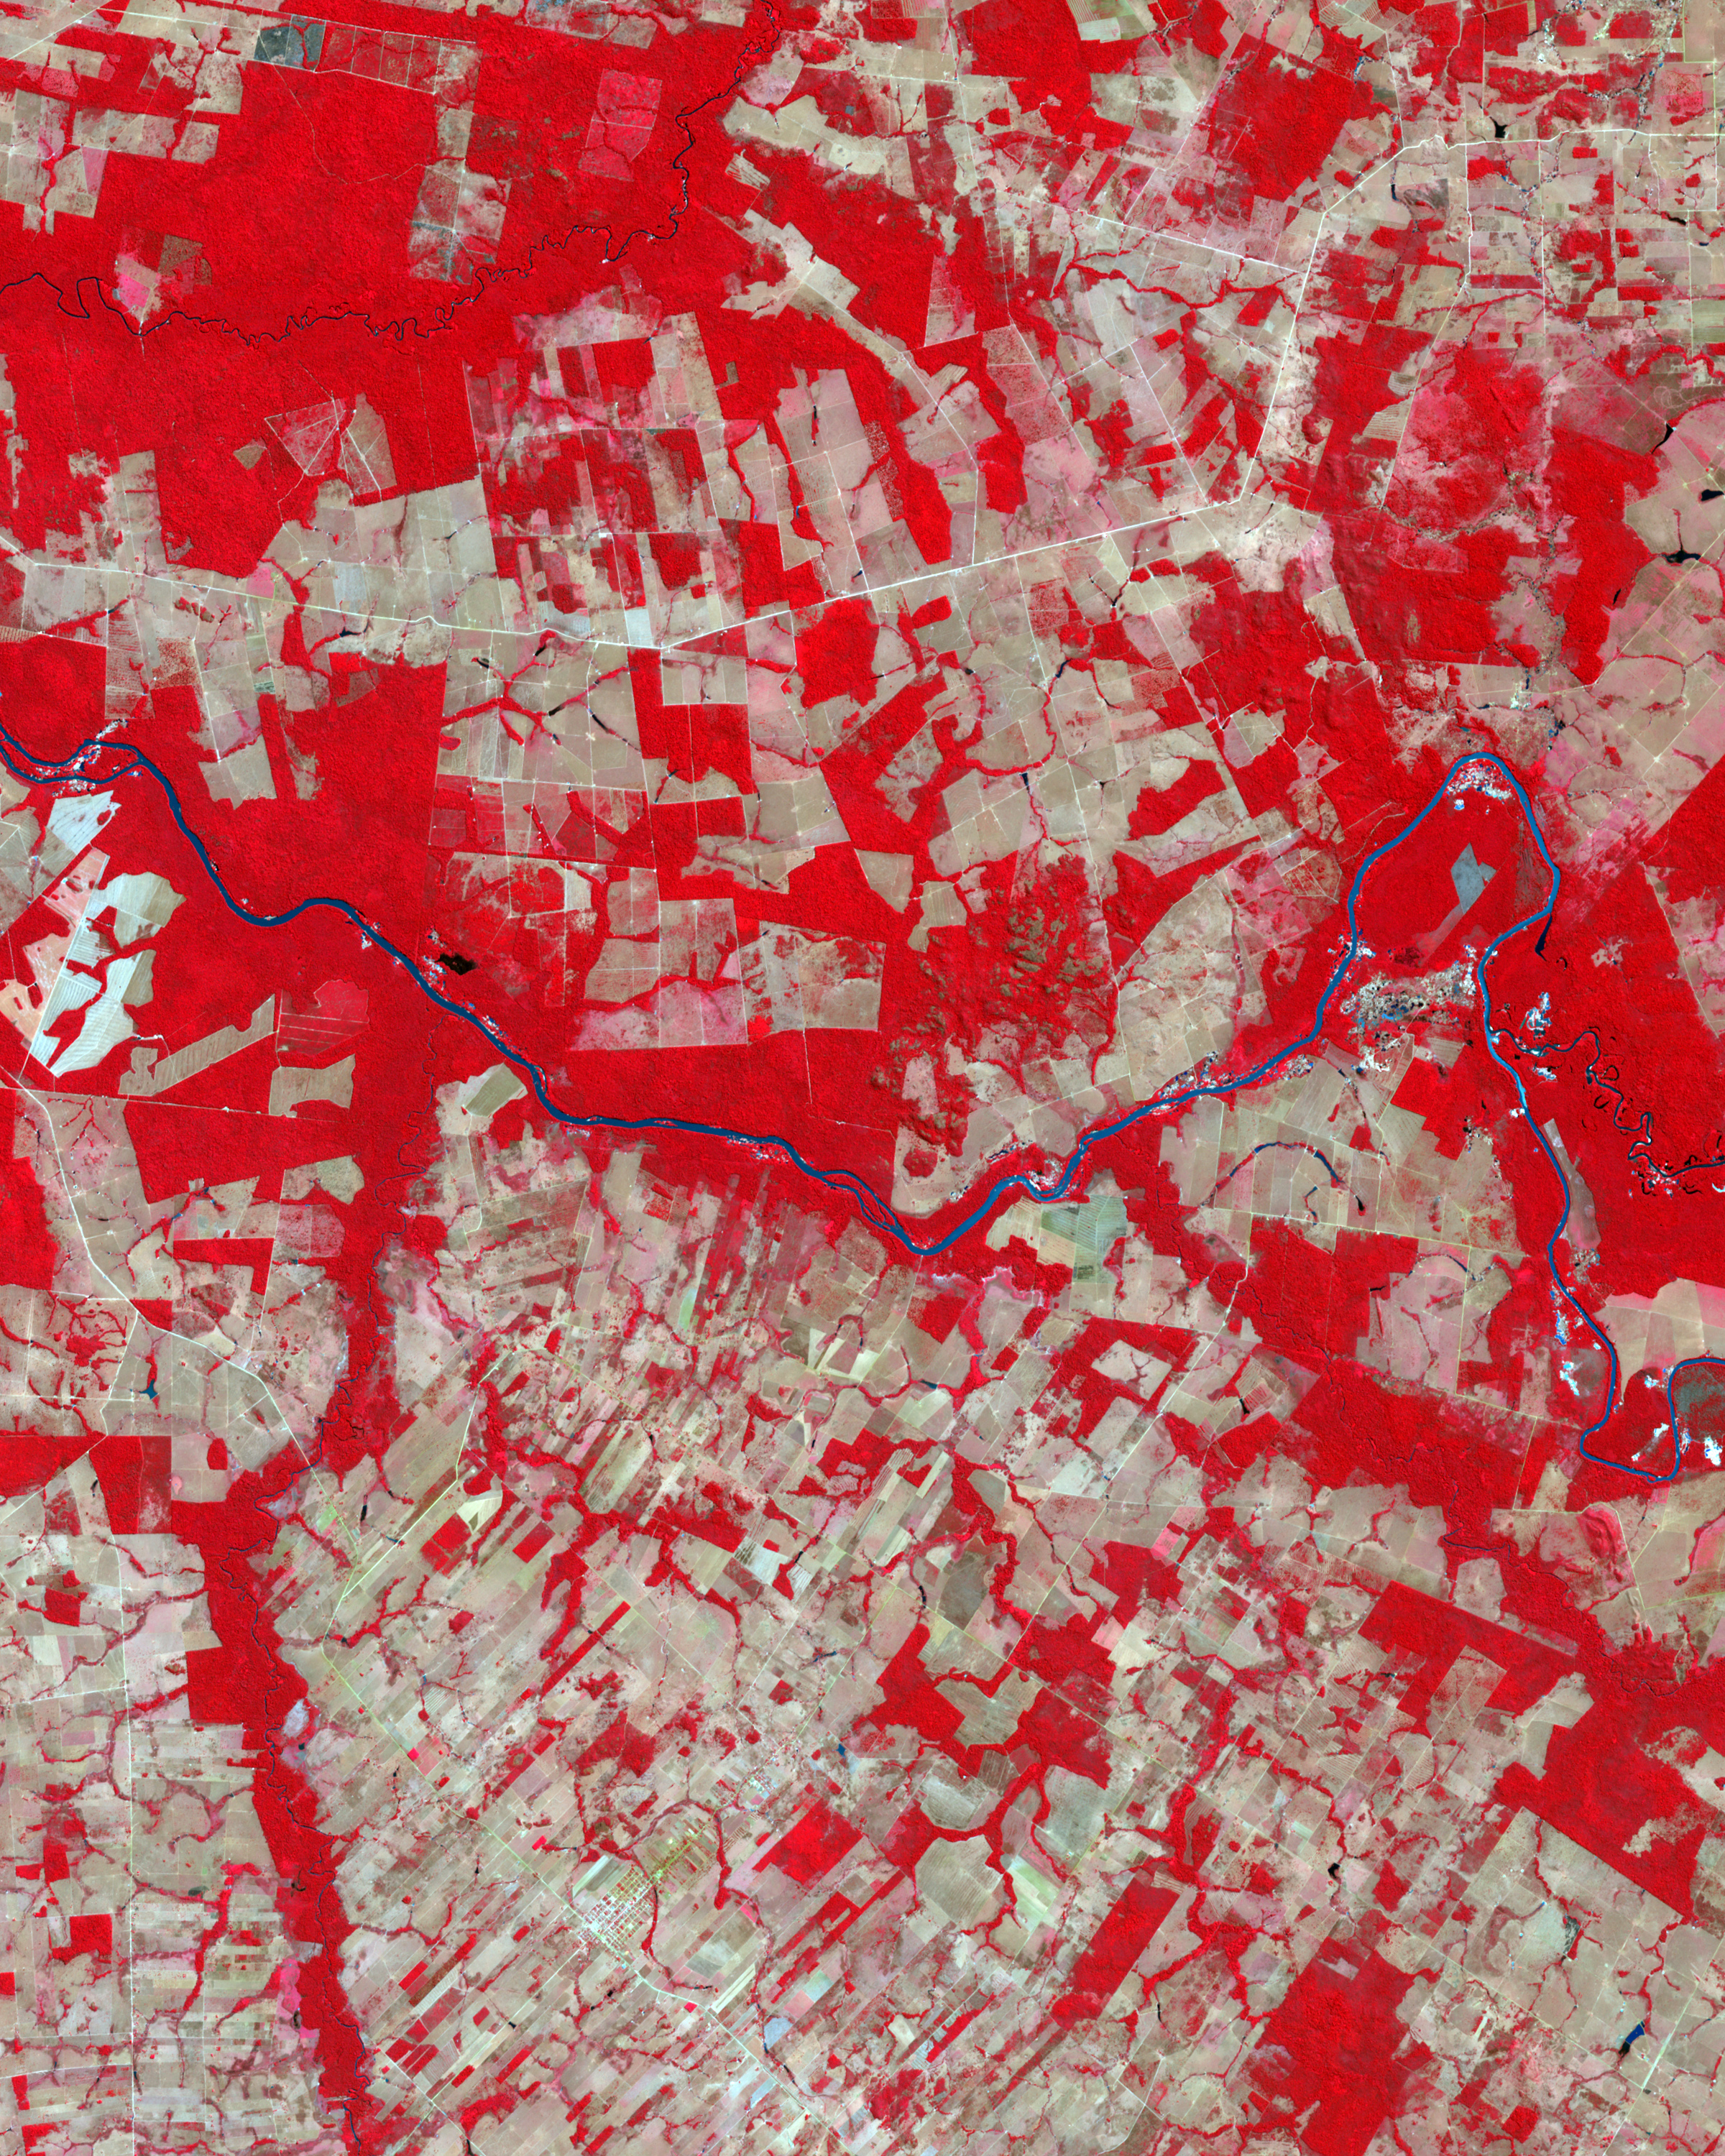 Deforestation in Mato Grosso, Brazil - related image preview